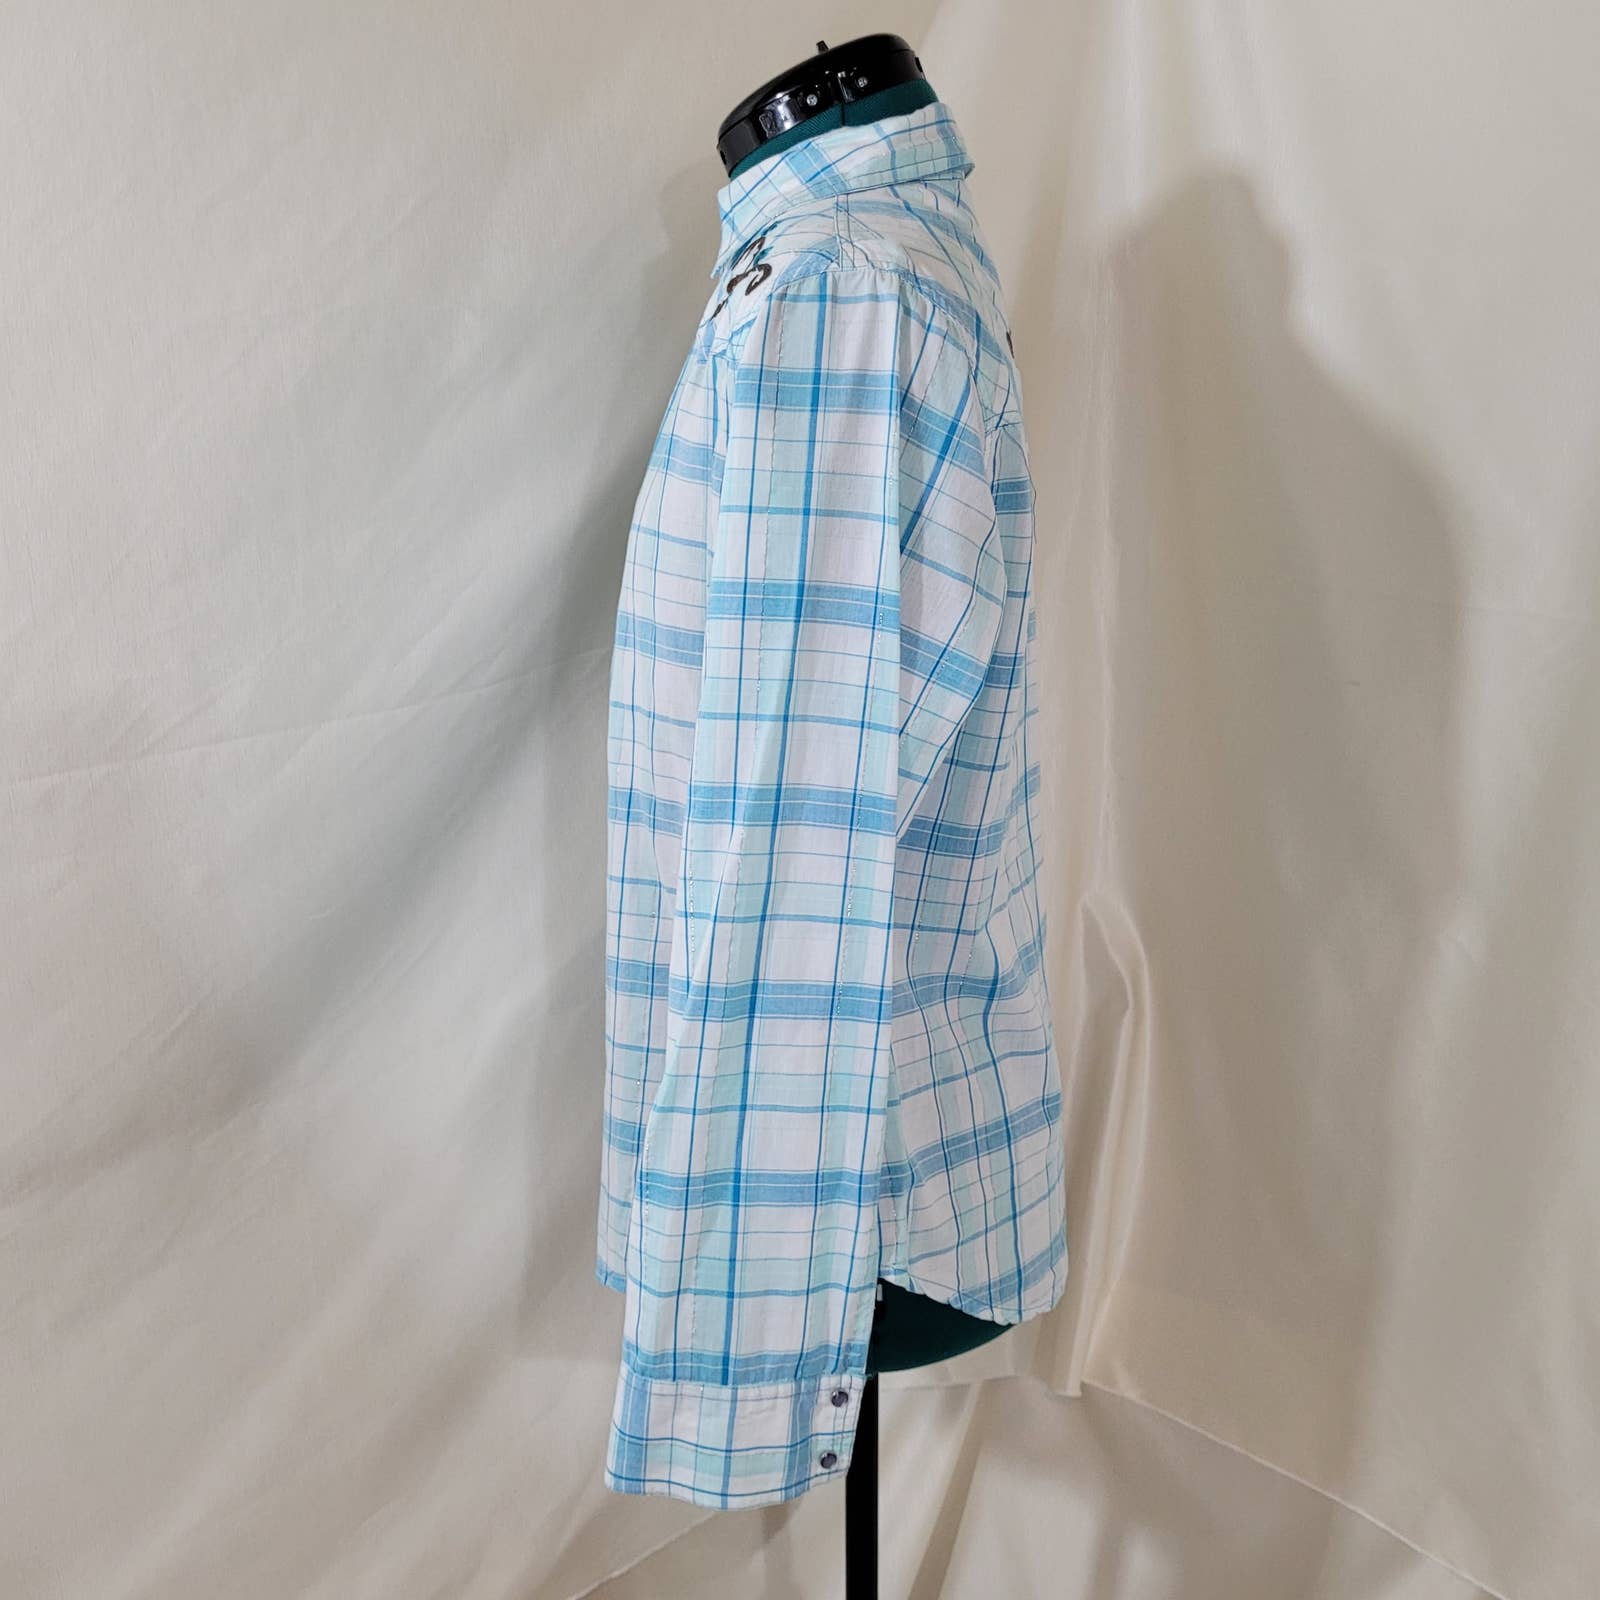 Cumberland Outfitters Blue Plaid Cowboy Cowgirl Blouse - Size MediumMarkita's ClosetCumberland Outfitters